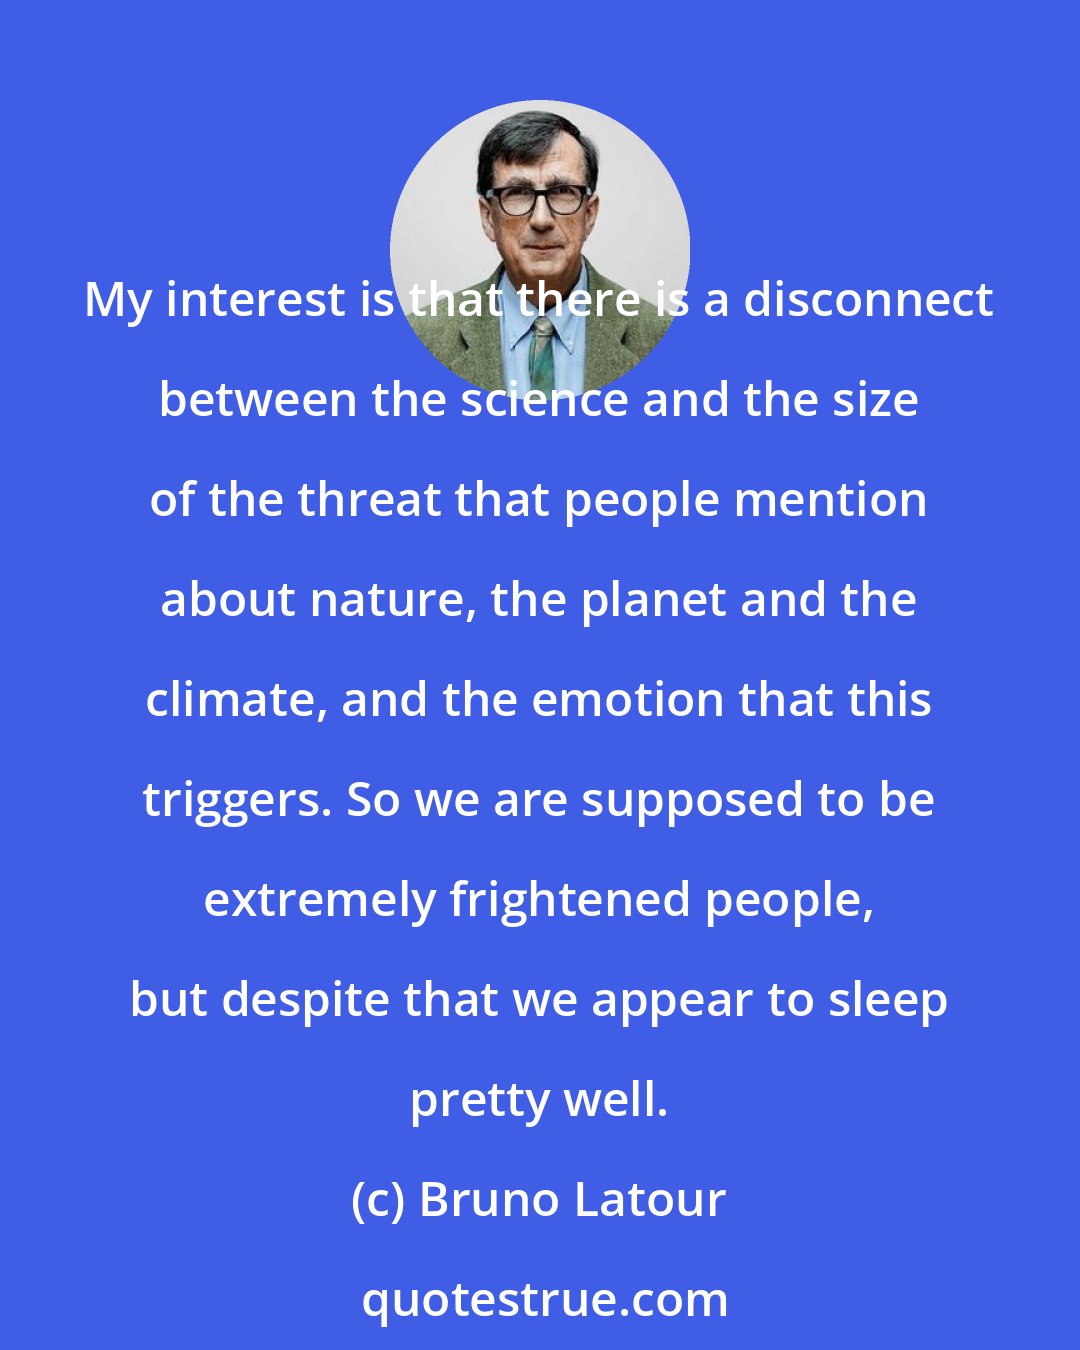 Bruno Latour: My interest is that there is a disconnect between the science and the size of the threat that people mention about nature, the planet and the climate, and the emotion that this triggers. So we are supposed to be extremely frightened people, but despite that we appear to sleep pretty well.